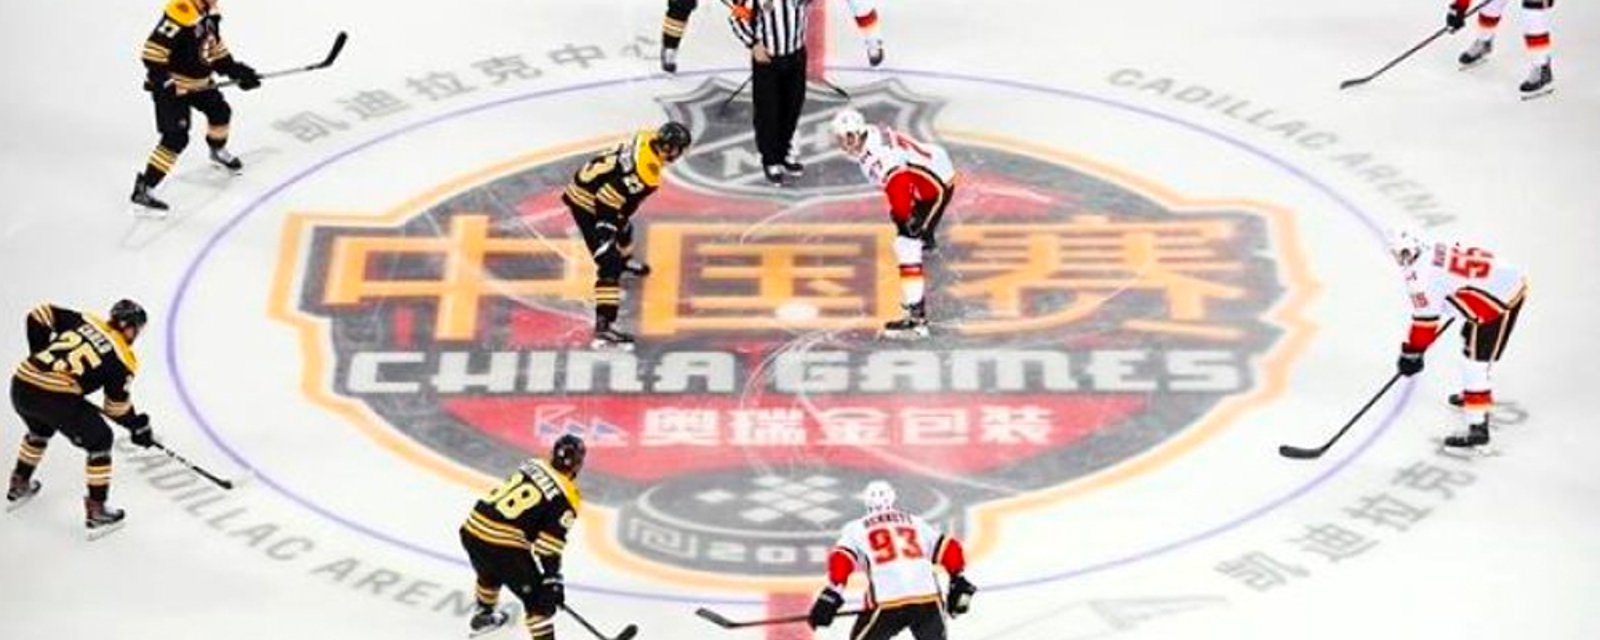 NHL takes a controversial stance on games in China and coronavirus outbreak